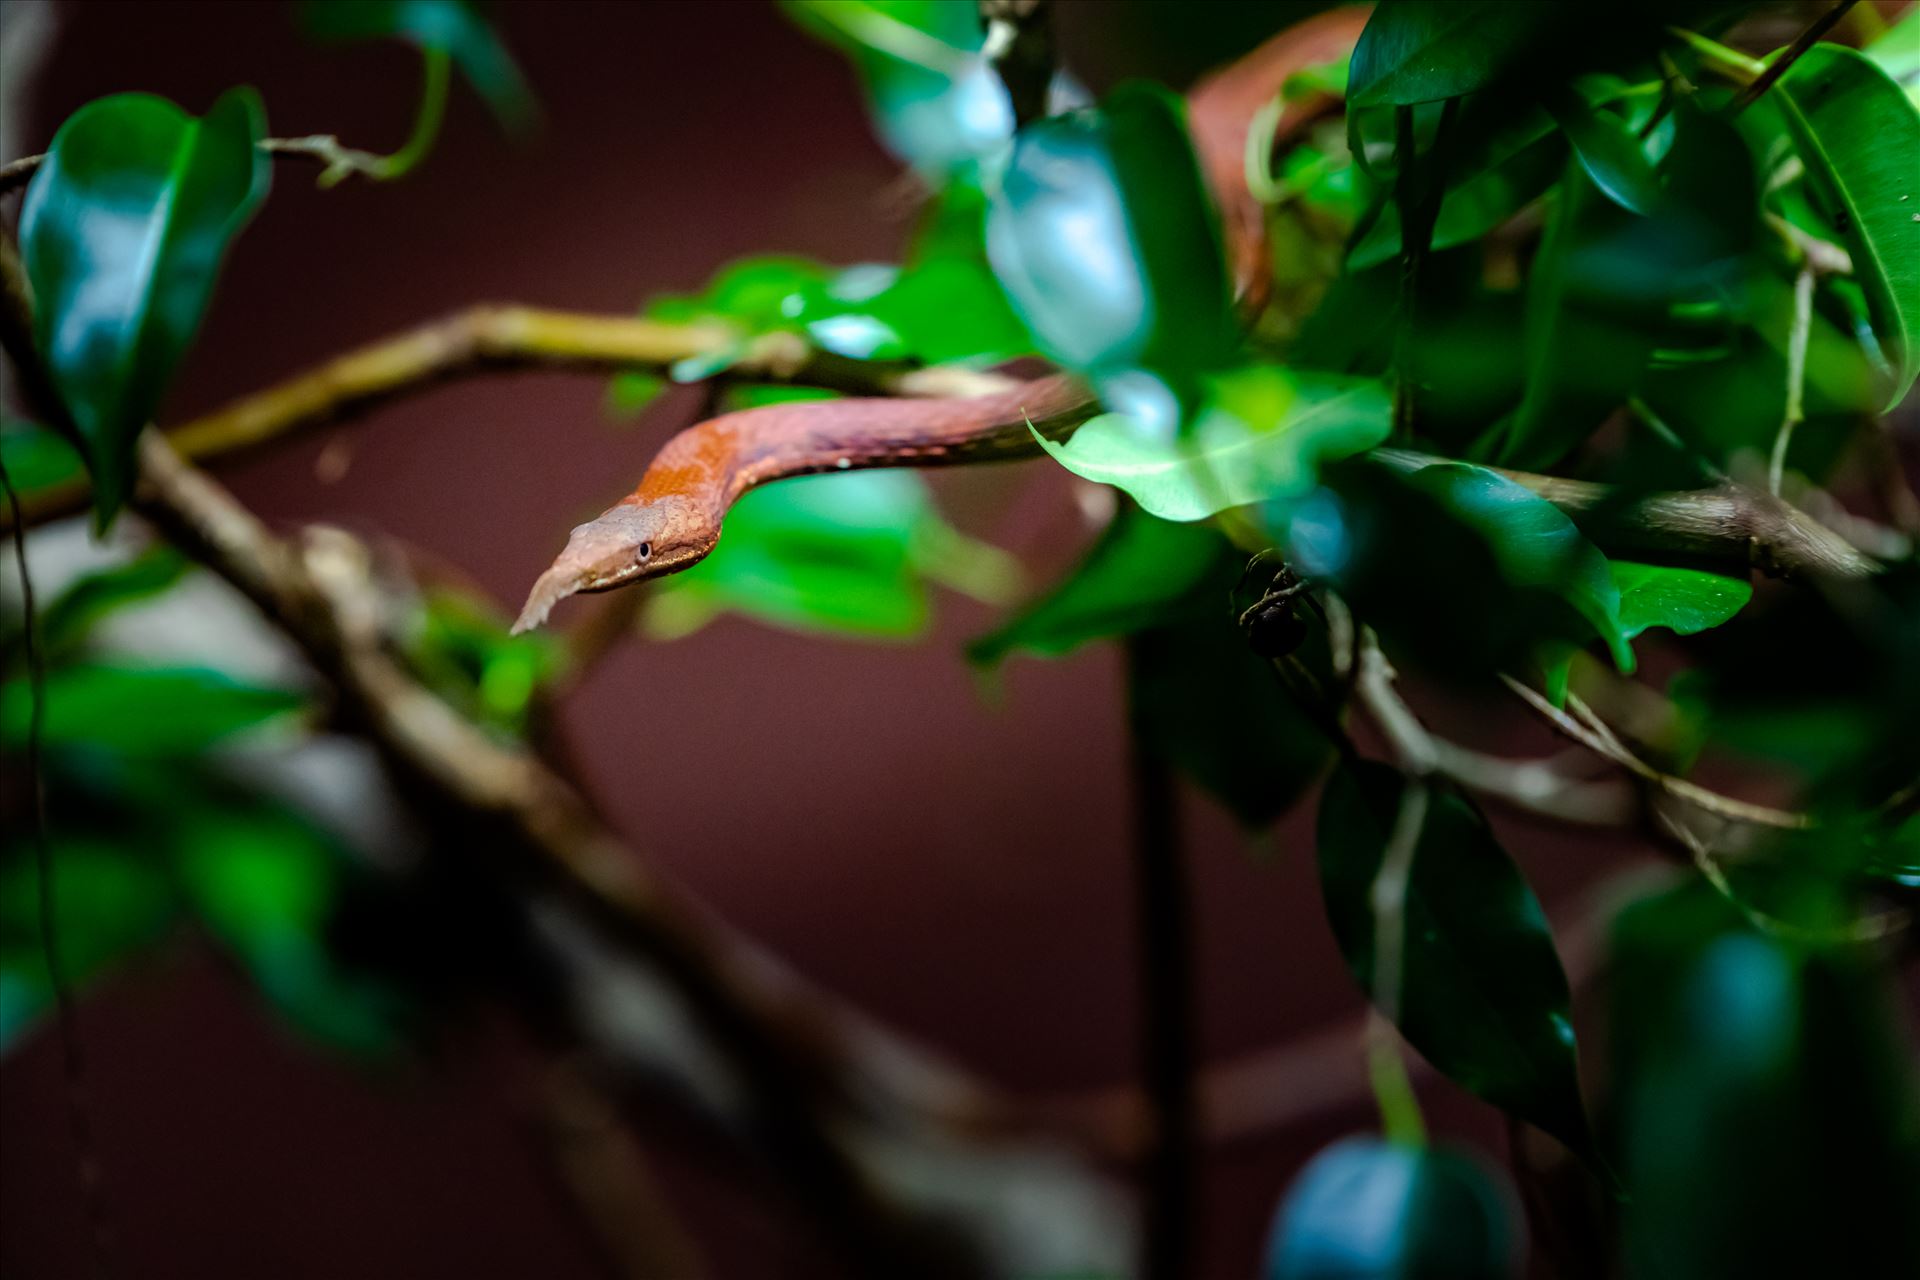 madagascar leaf nosed snake ss as sf.jpg - madagascar leaf nosed snake crawling out of small bush. by Terry Kelly Photography